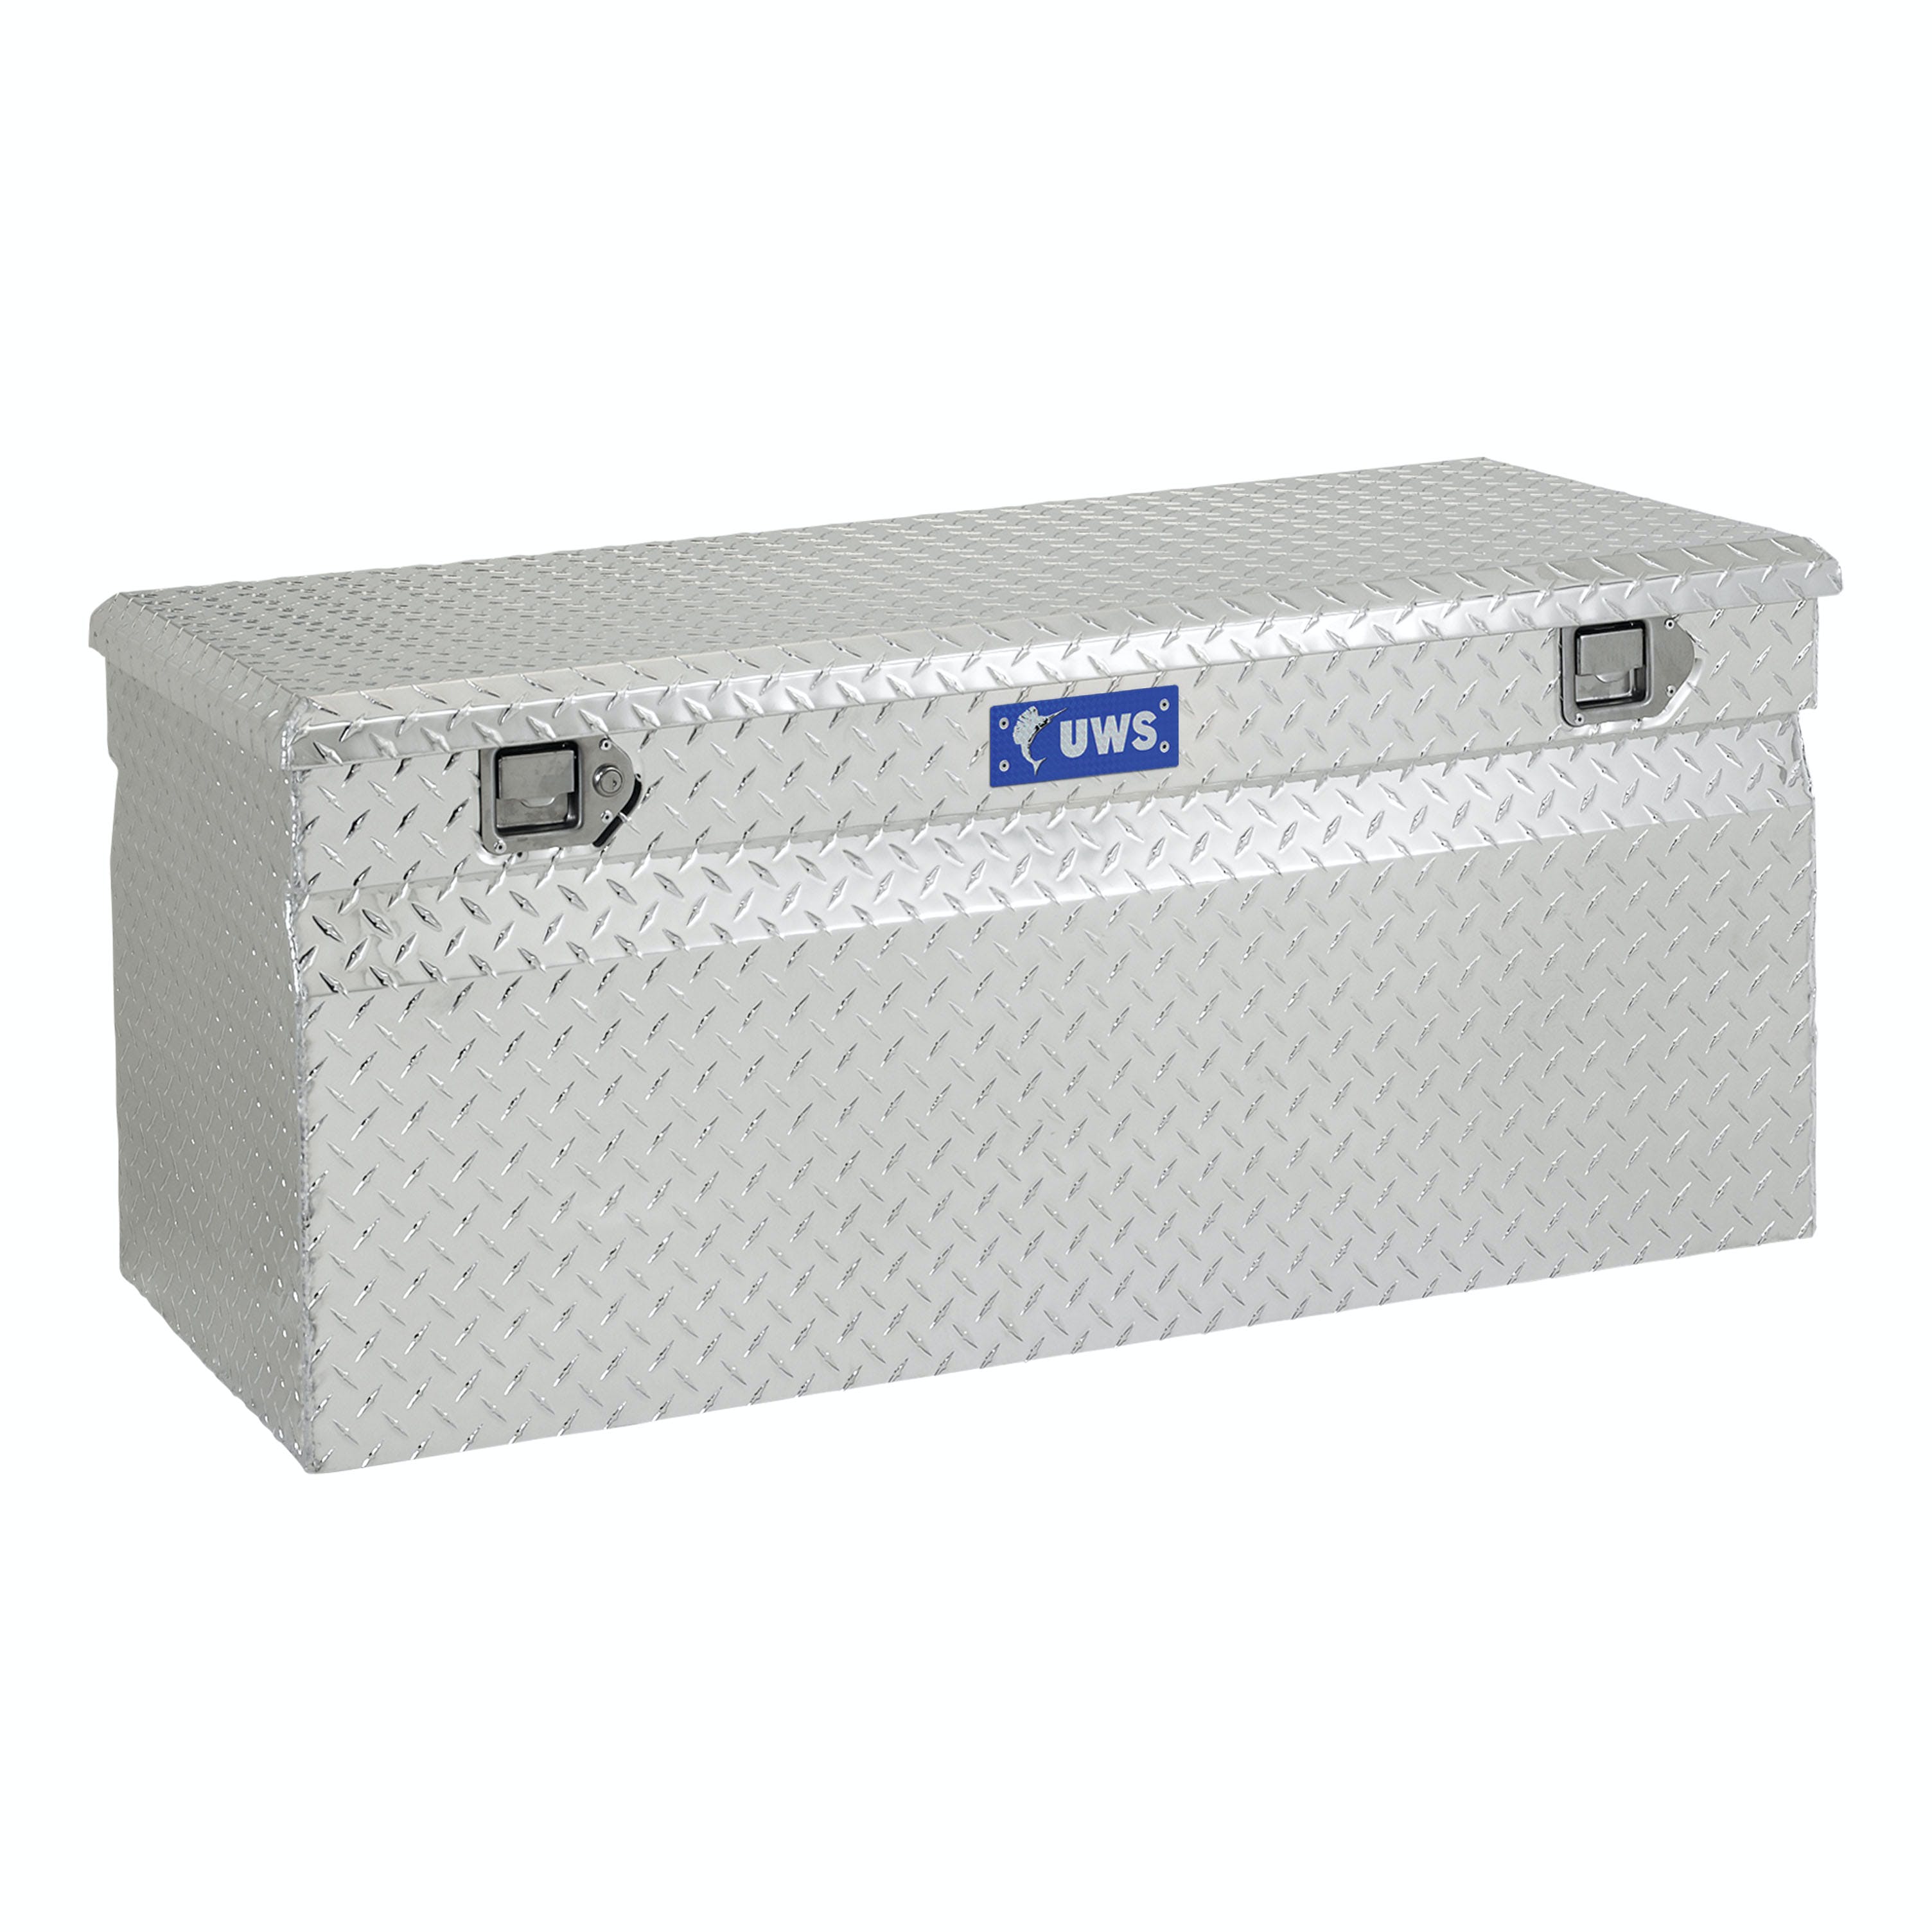 UWS TBC-48-DD 48 inch Aluminum Chest Box for #UWS-Carrier